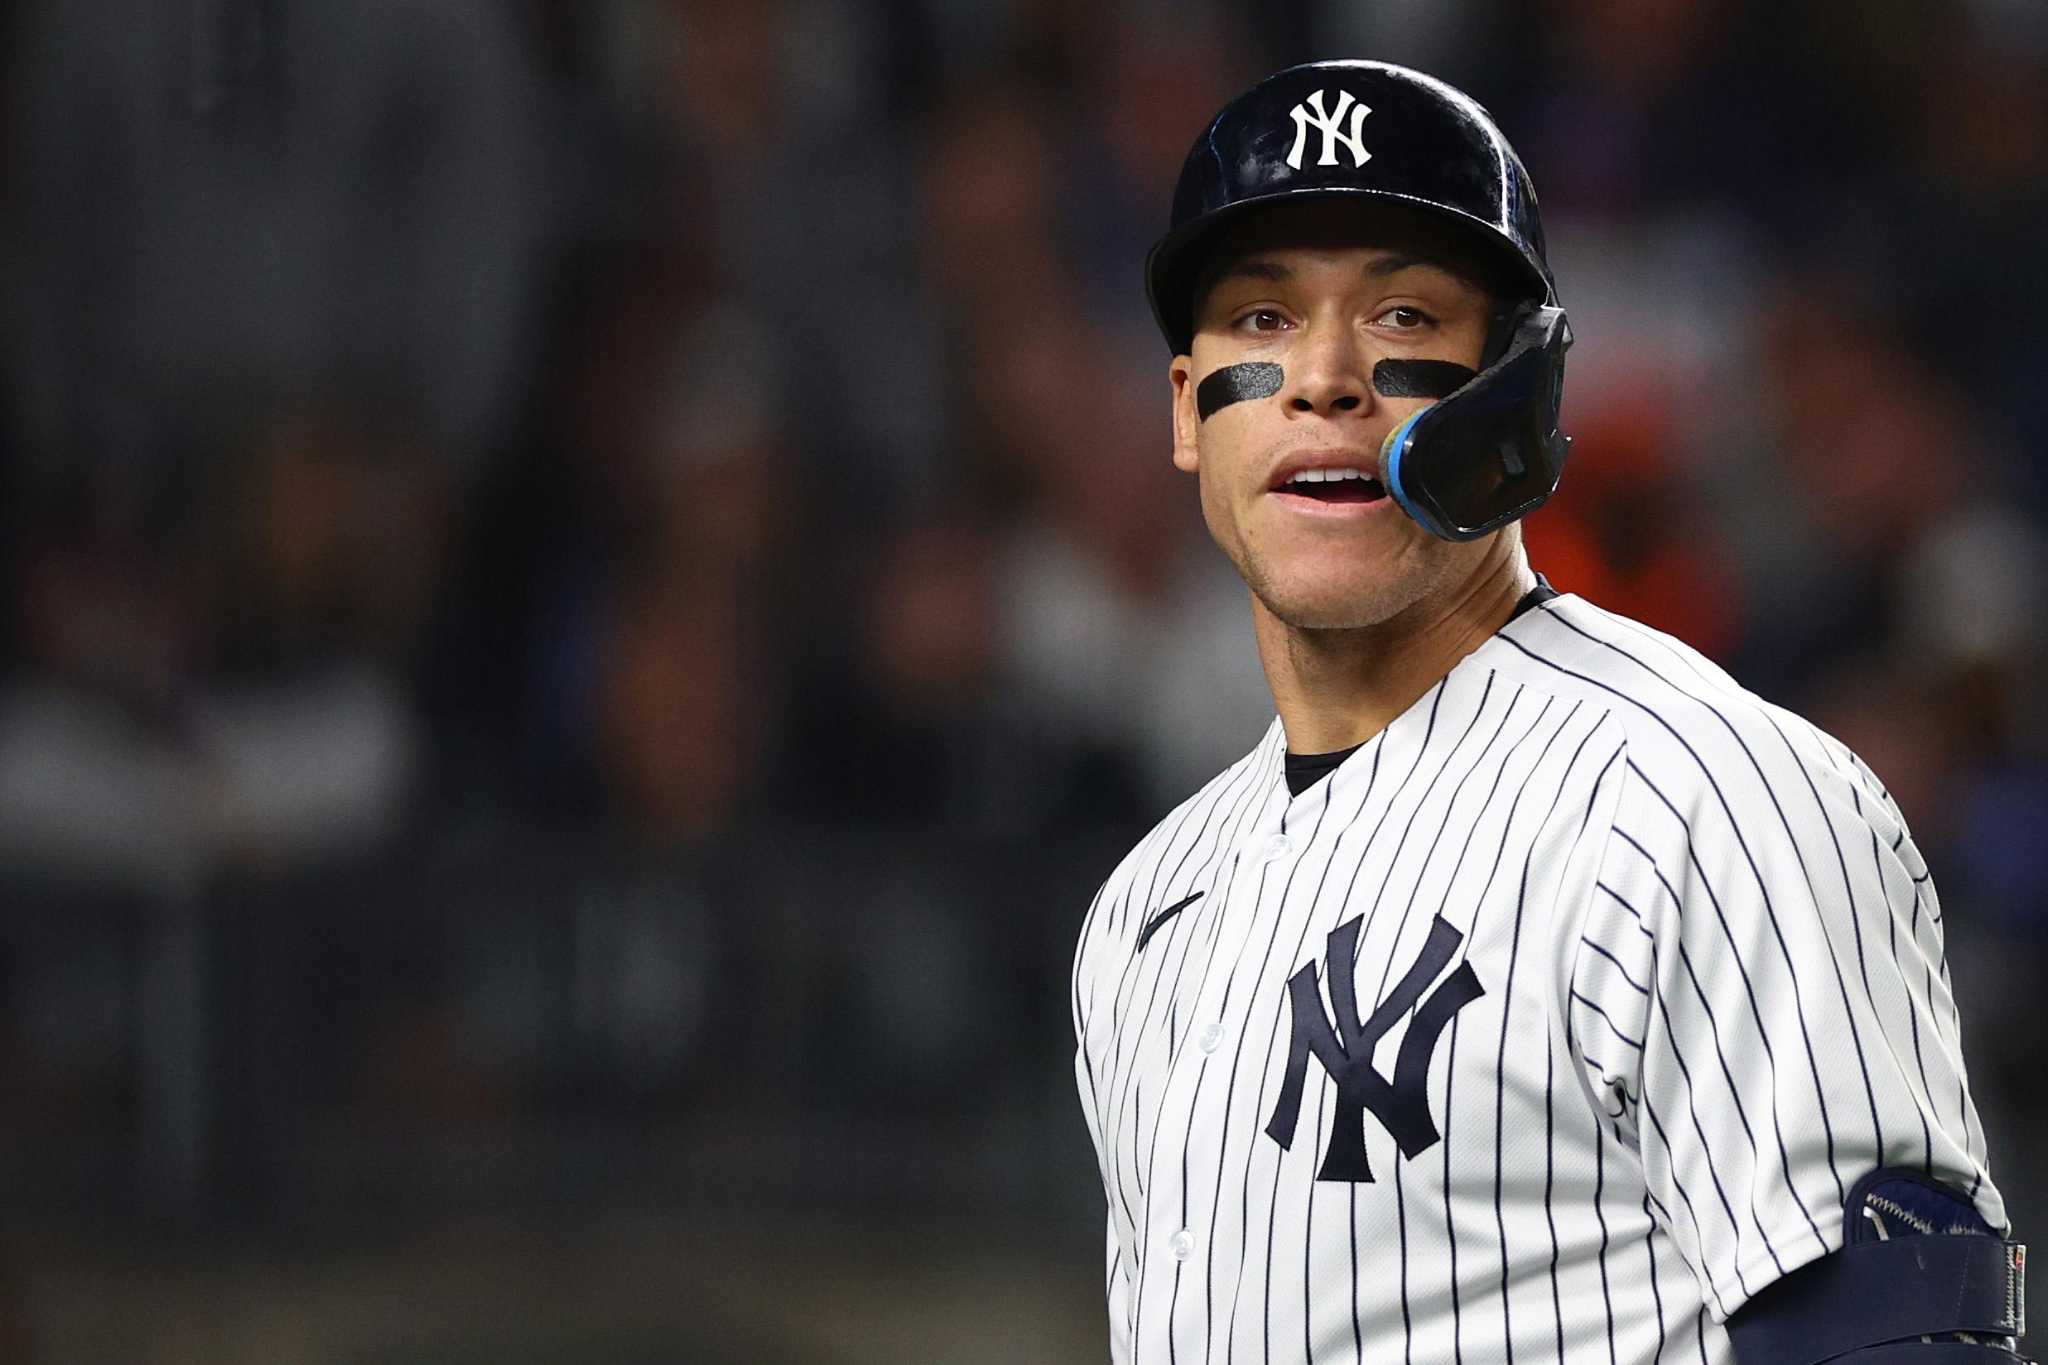 Yankees' Aaron Judge is leading contender for AL MVP because the